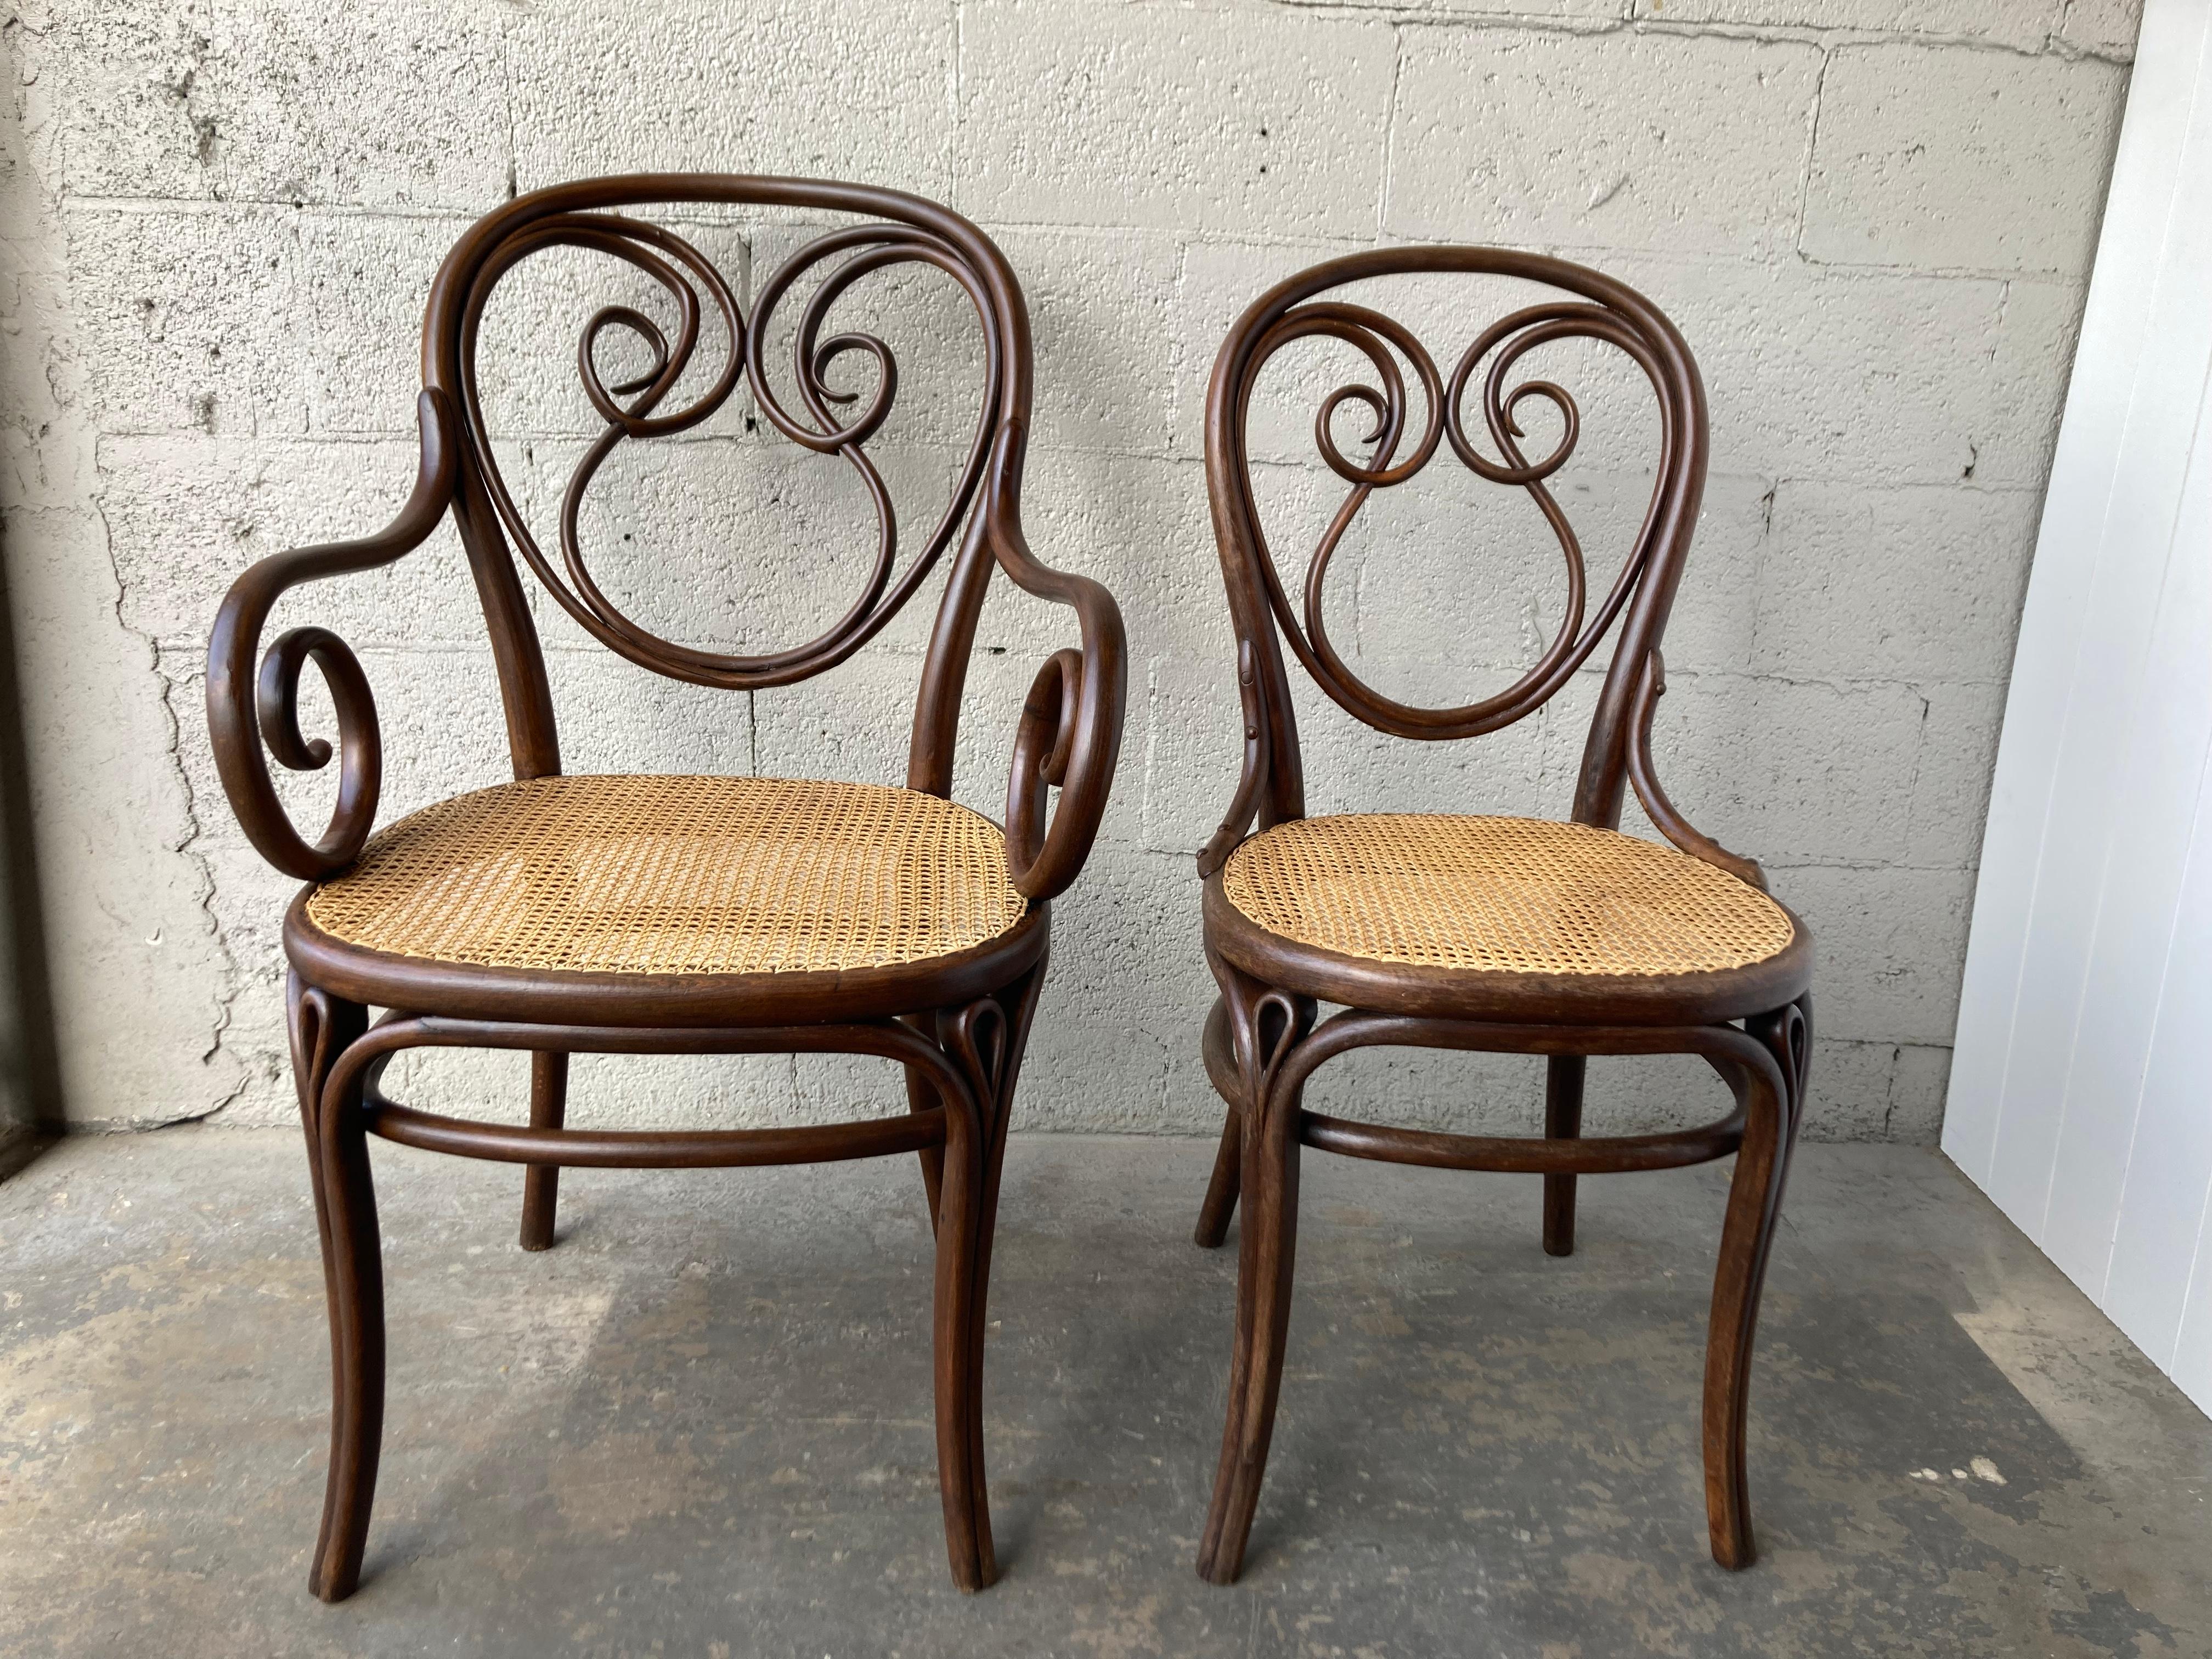 Rare Set of Thonet Chairs Model 13, Bentwood and Cane For Sale 12